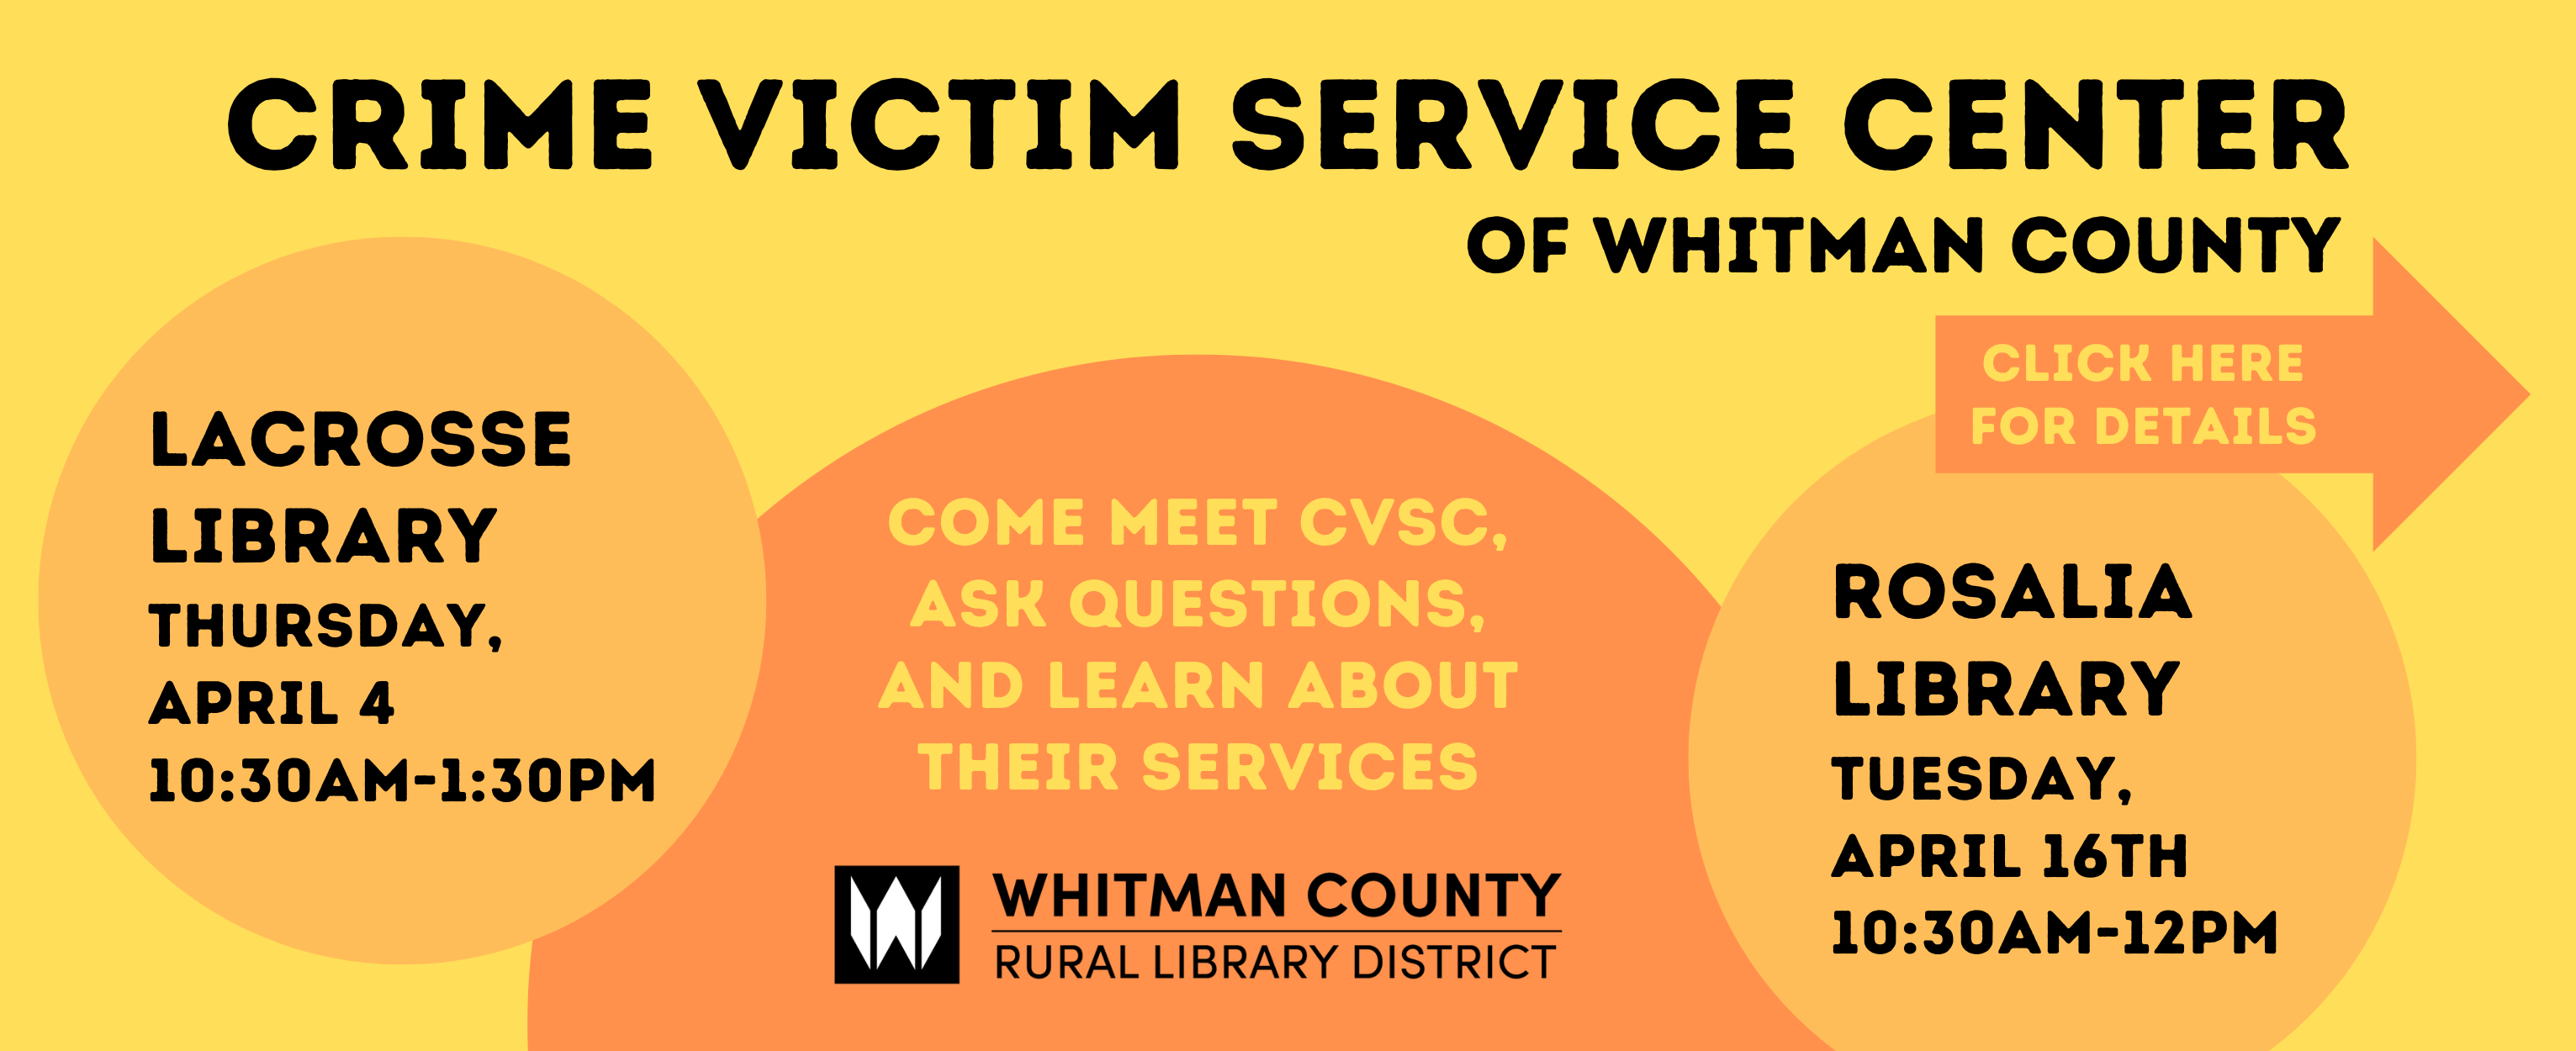 Come meet Whitman County's Crime Victim Service Center at our LaCrosse and Rosalia Libraries this April. Click here for details.